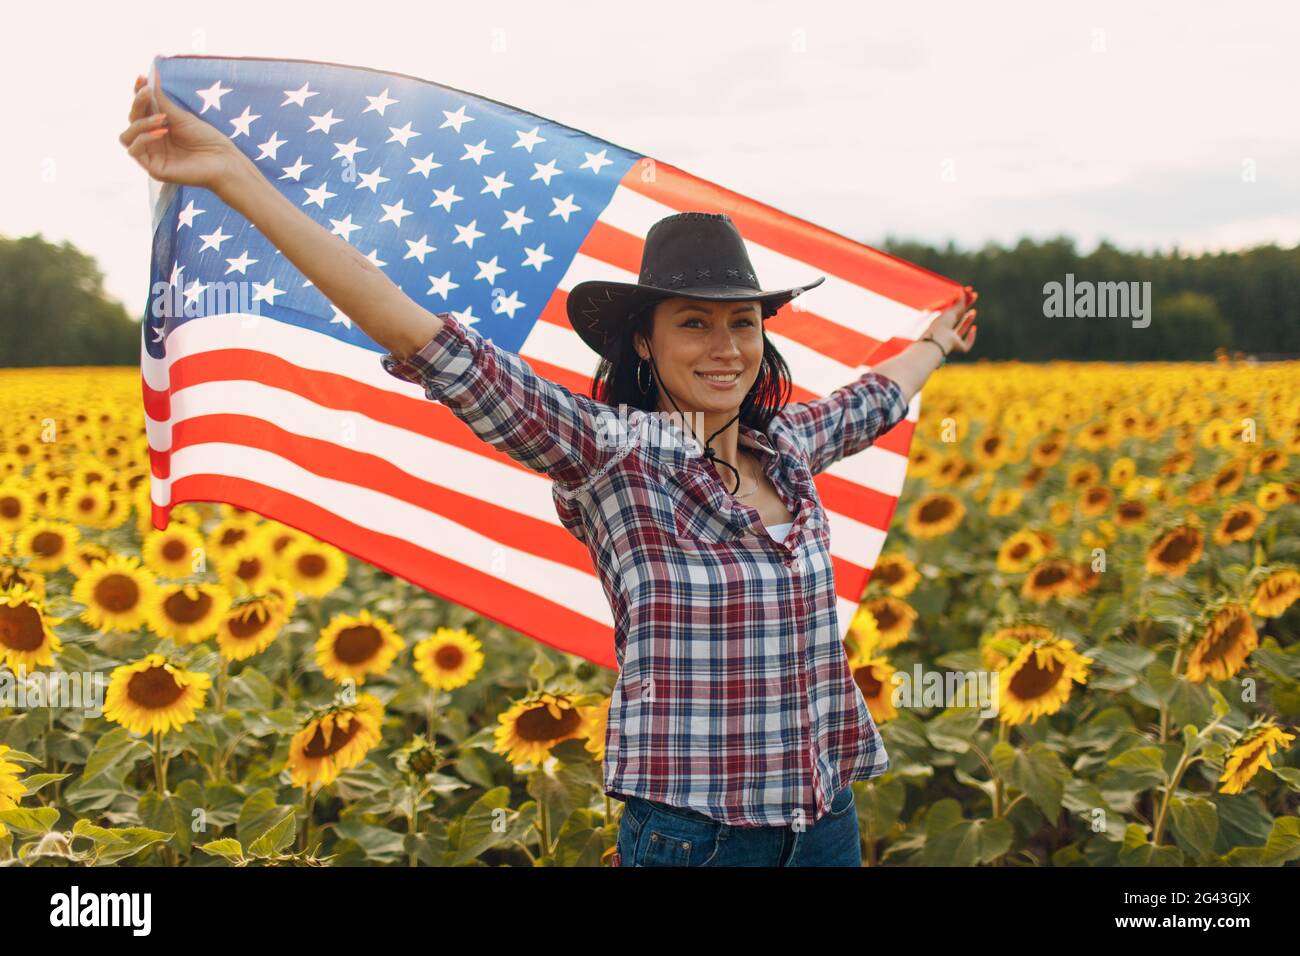 Young smiling woman with American flag in the sunflower field. 4th of July Independence Day USA concept. Stock Photo